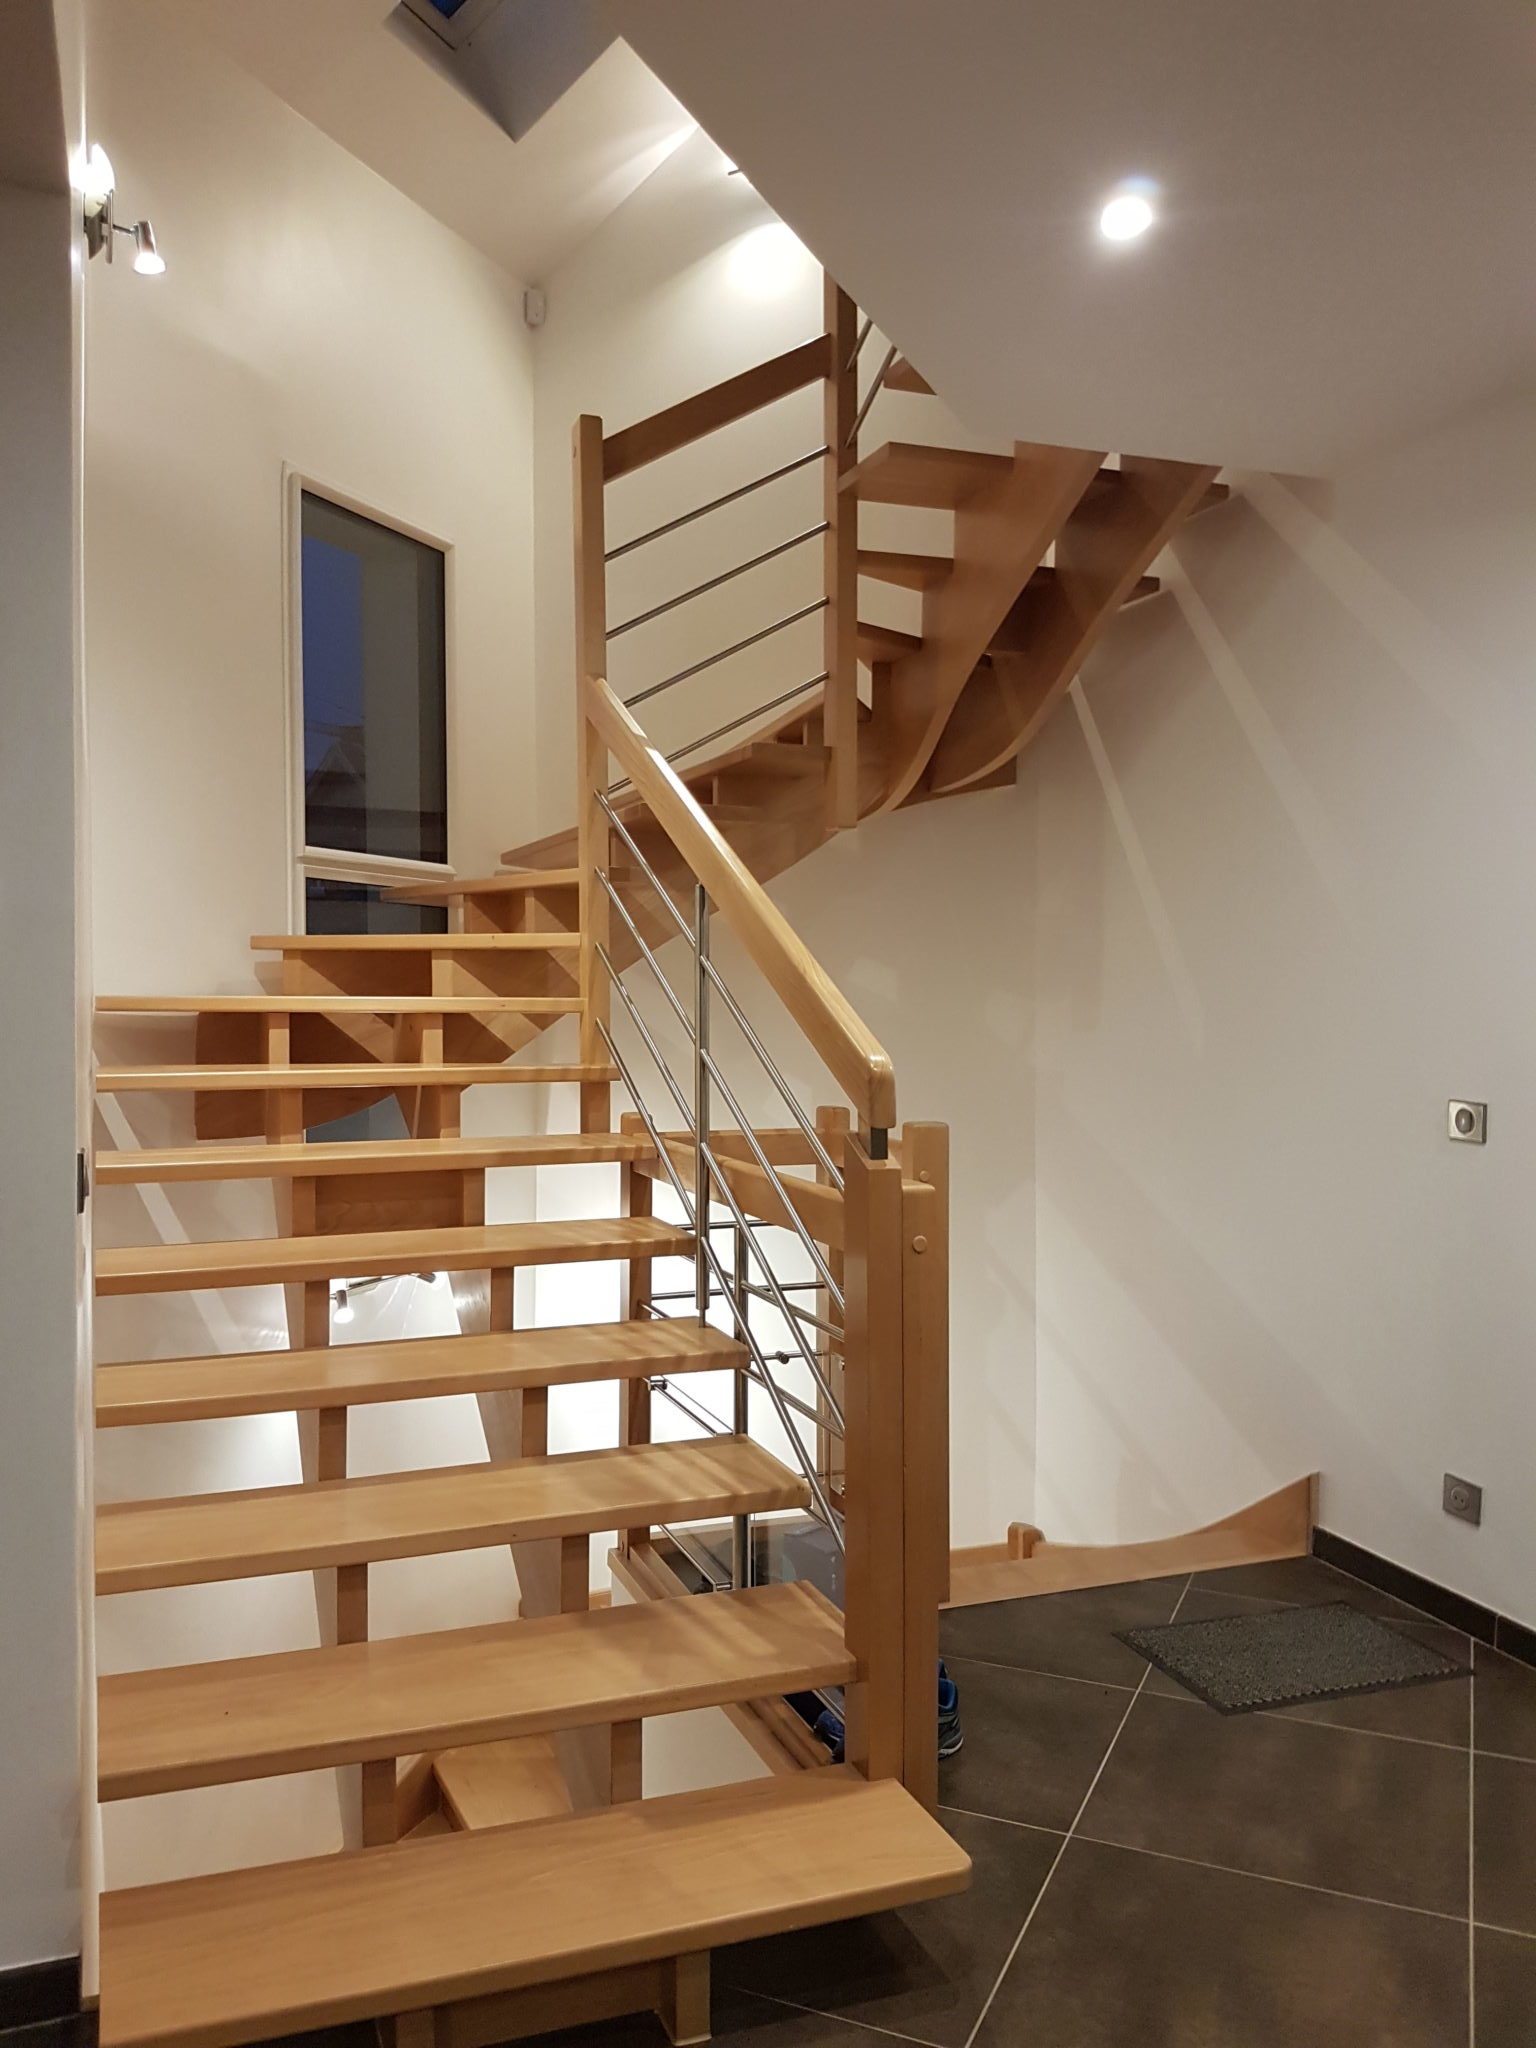 Photo of the interior wooden and steel staircase for this modern detached house